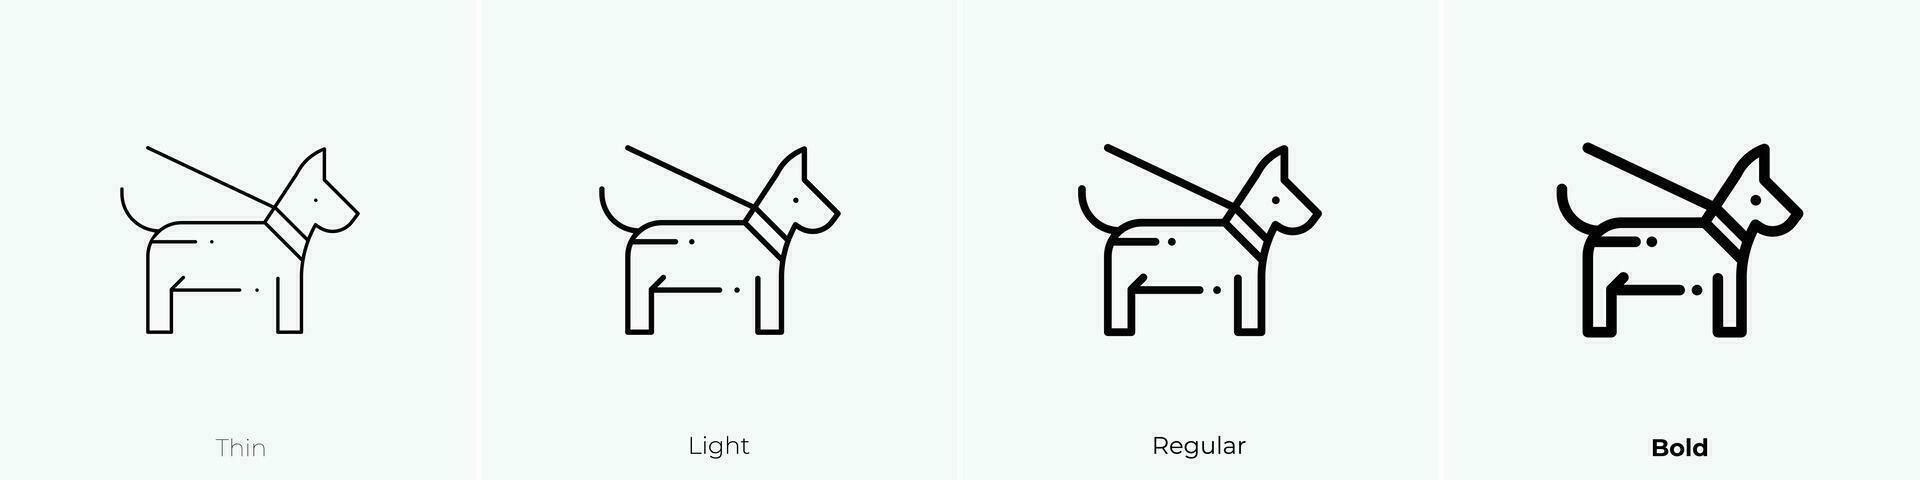 pet icon. Thin, Light, Regular And Bold style design isolated on white background vector